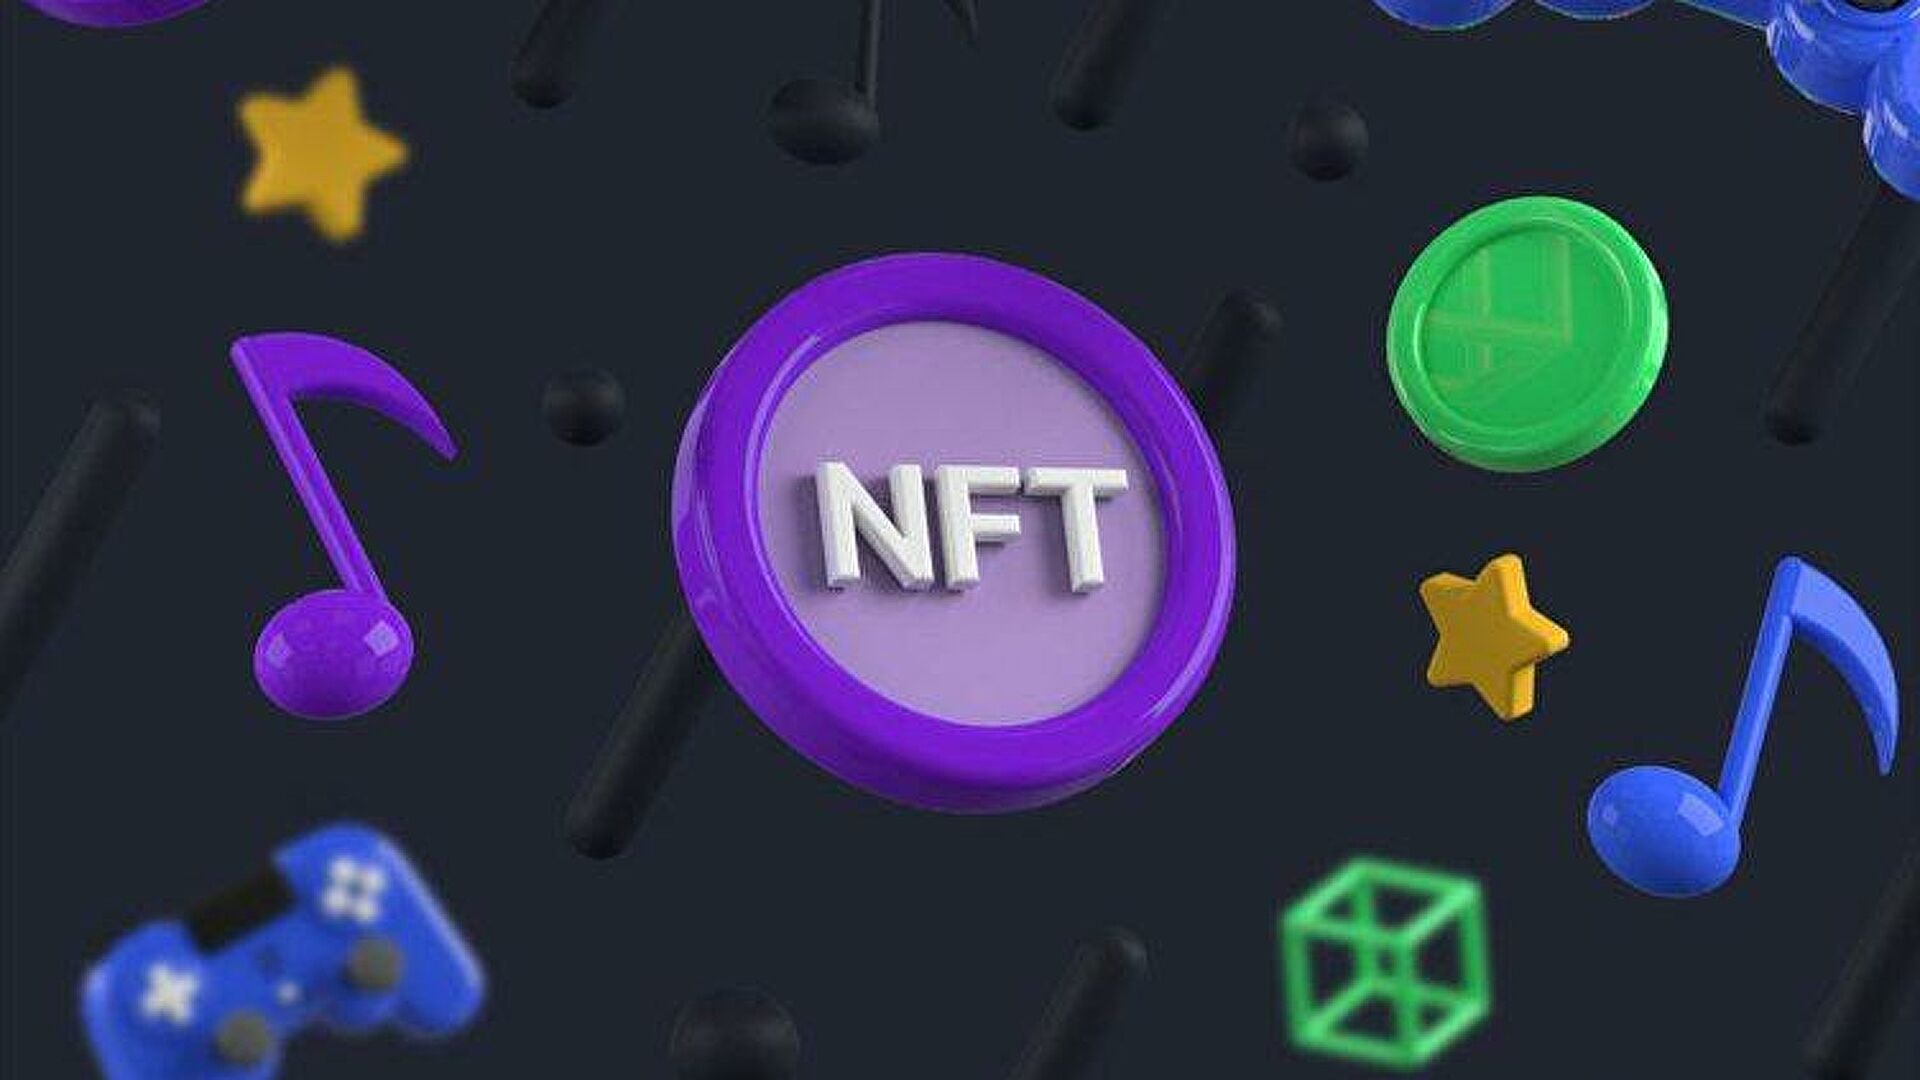 NFT transactions reached $17 billion in 2021